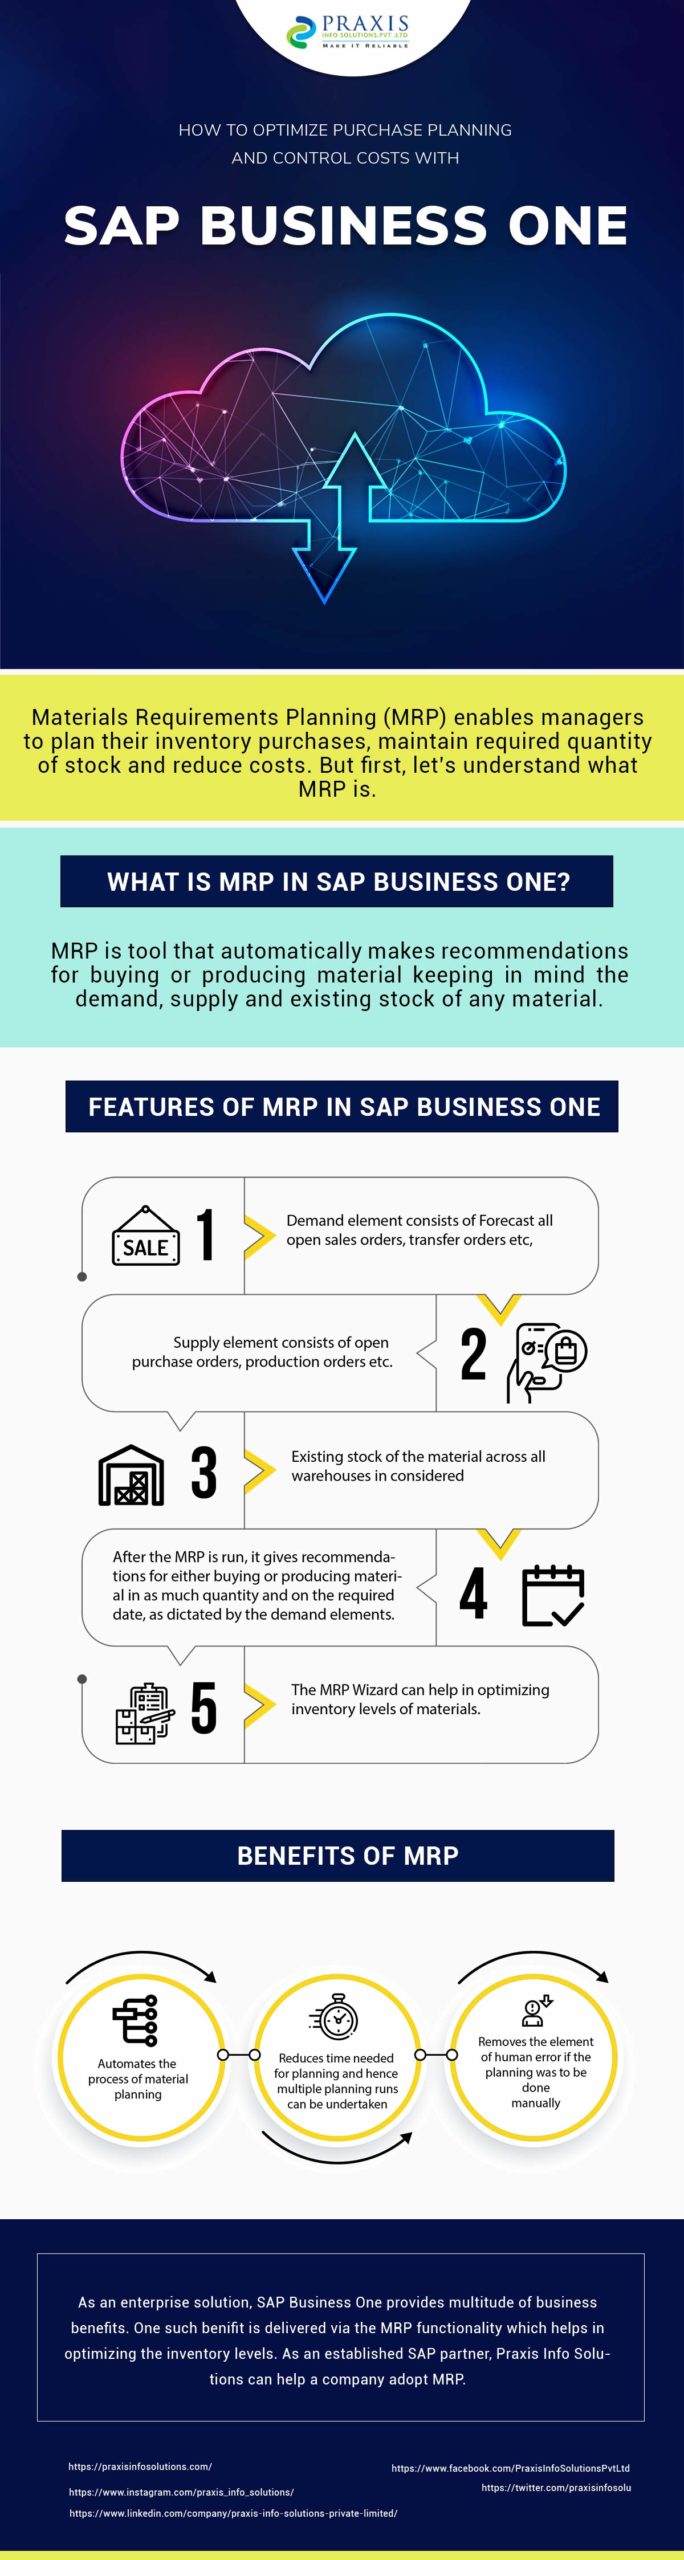 Optimize Purchase Planning and Control Costs with SAP Business One